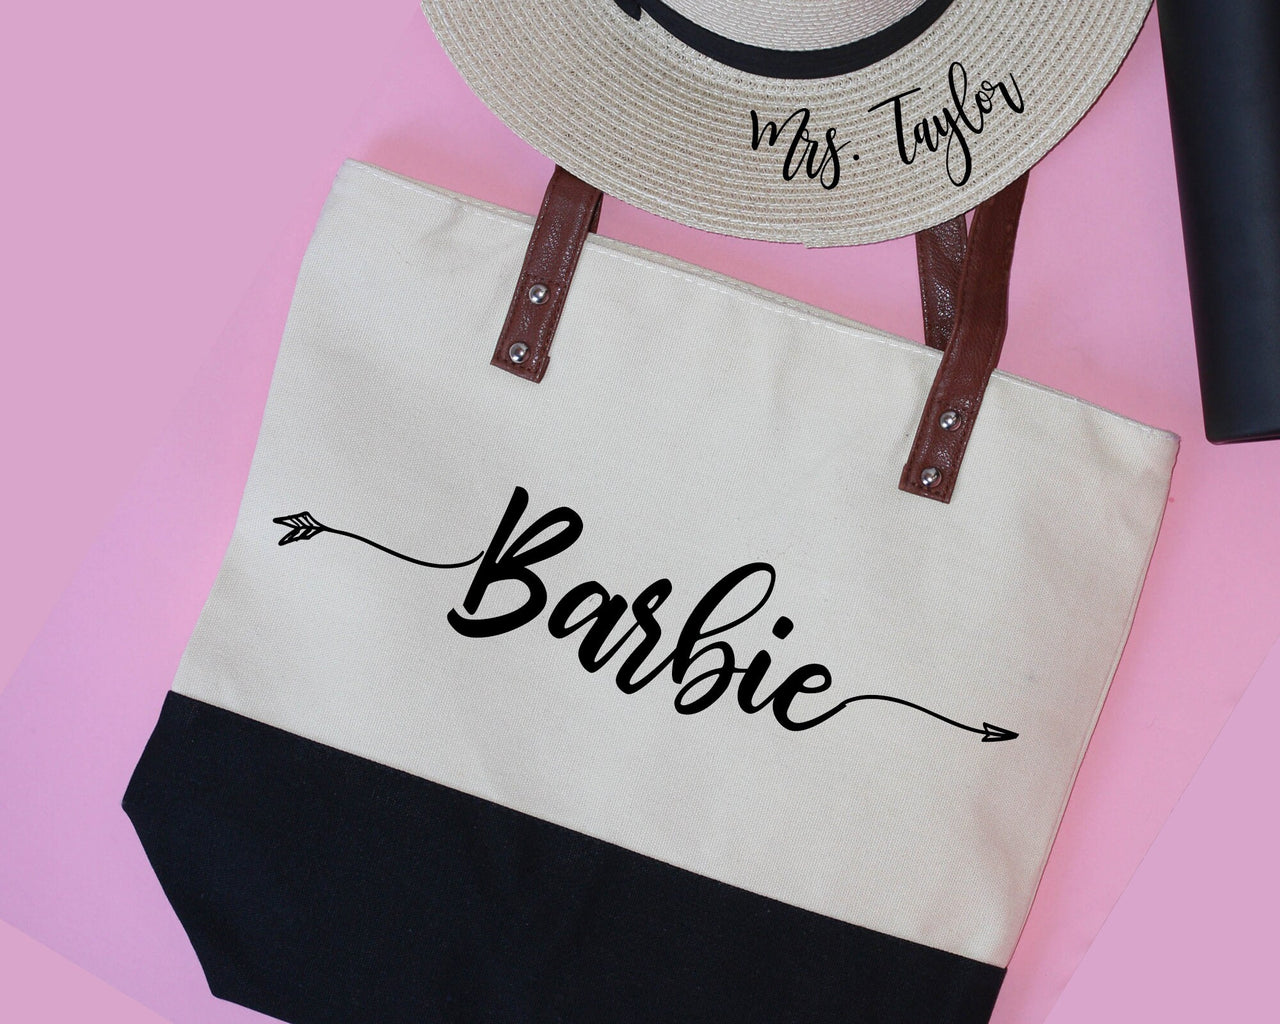 Bridesmaid gifts Boho arrow Personalized canvas Tote Bags zipper and faux leather straps Set of 6 7 8 gift for Bridal Party bags -FTB3CHTV